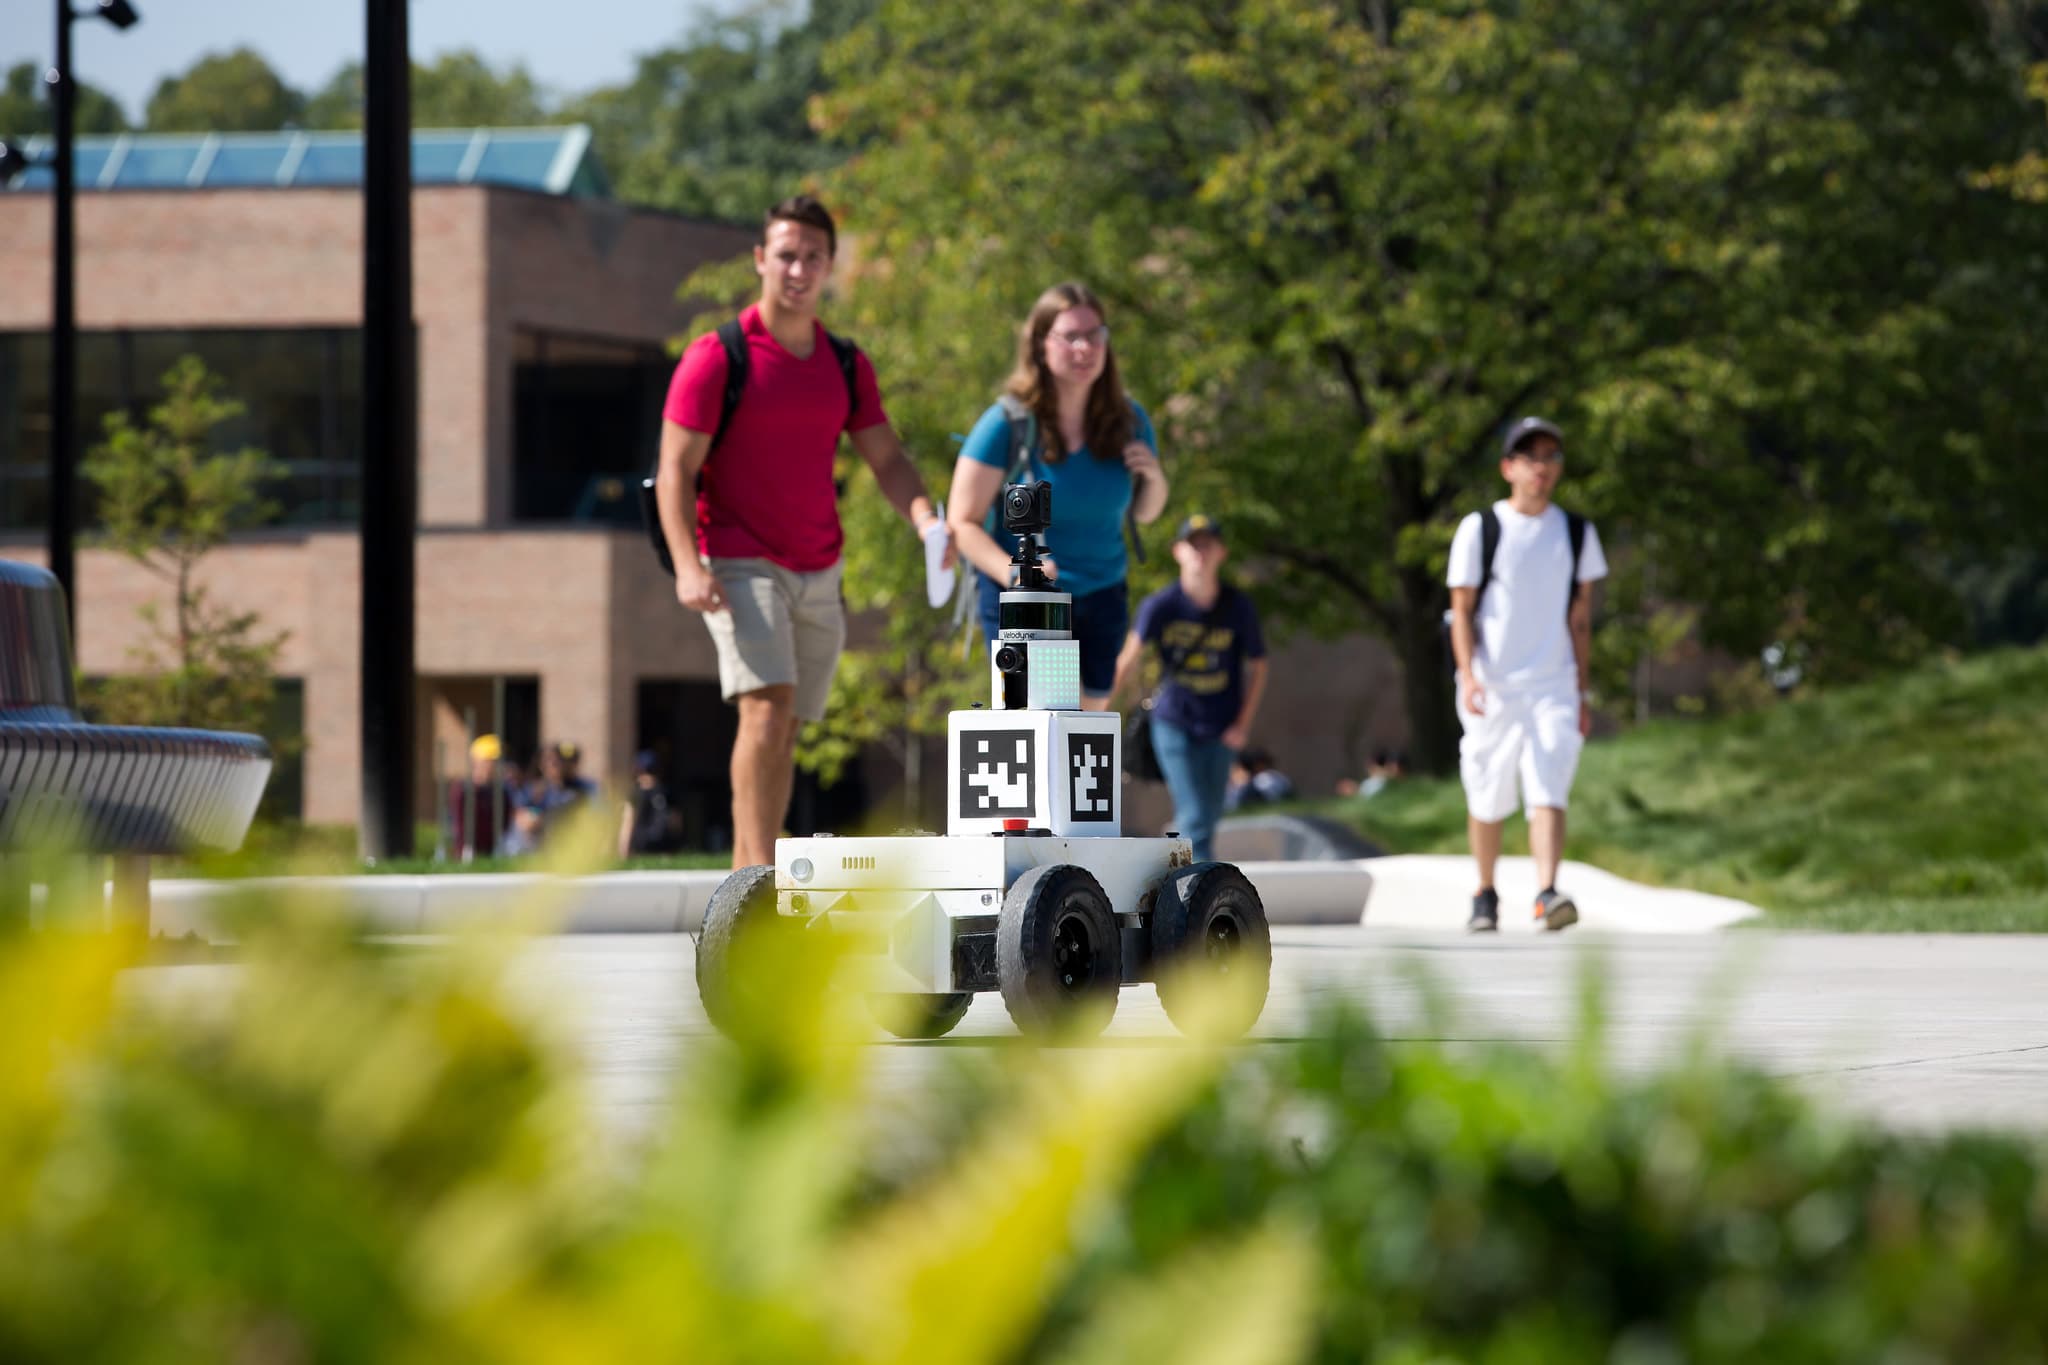 a robotic car moving across campus with onlookers behind